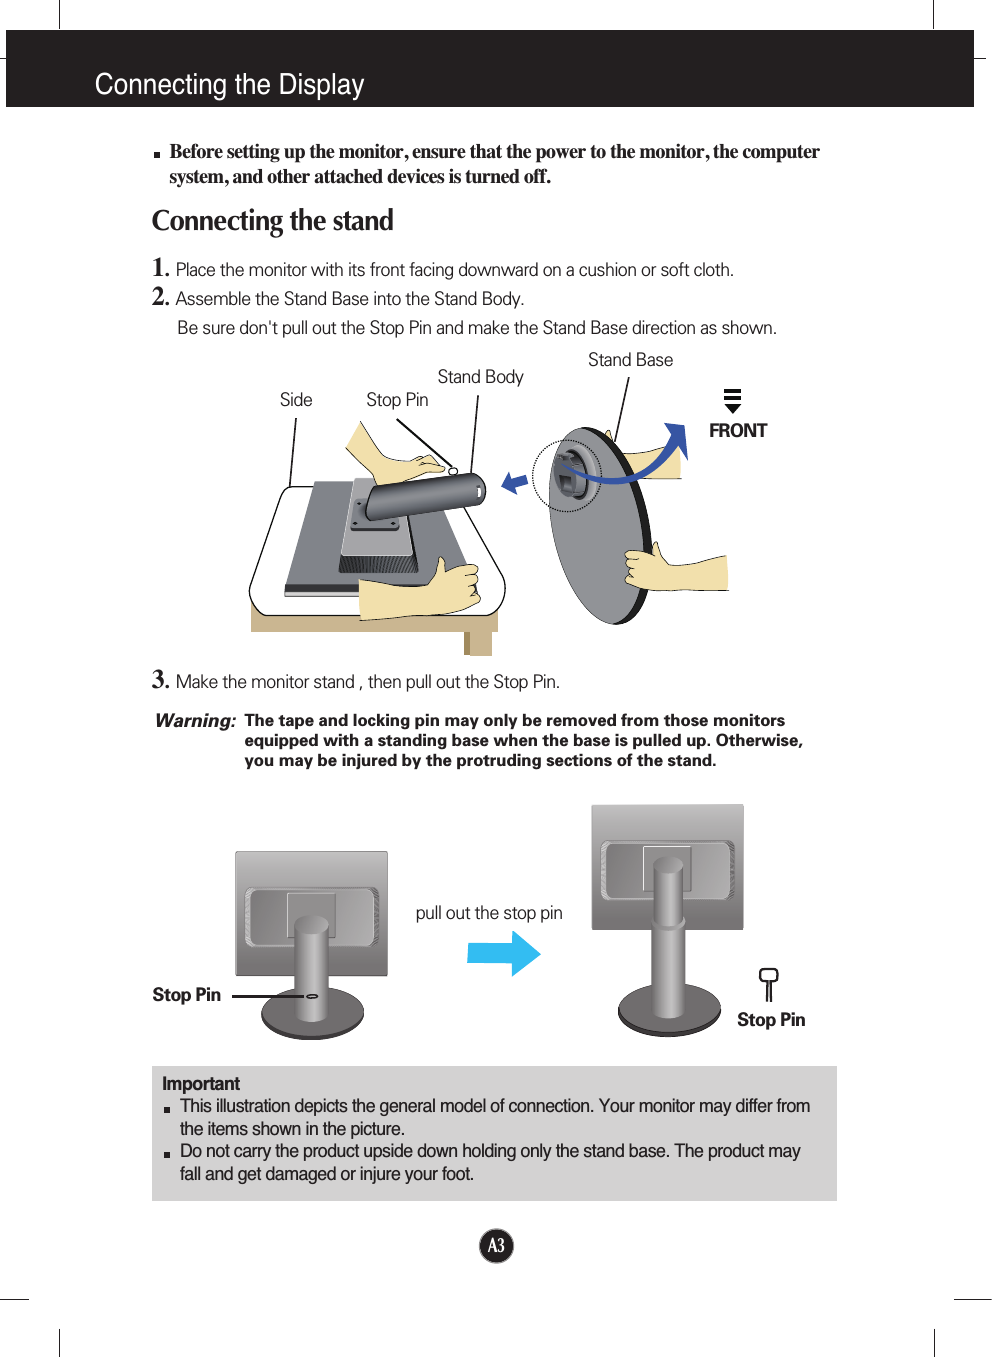 A3Connecting the DisplayImportantThis illustration depicts the general model of connection. Your monitor may differ fromthe items shown in the picture.Do not carry the product upside down holding only the stand base. The product mayfall and get damaged or injure your foot.Before setting up the monitor, ensure that the power to the monitor, the computersystem, and other attached devices is turned off.Connecting the stand 1.  Place the monitor with its front facing downward on a cushion or soft cloth.2.Assemble the Stand Base into the Stand Body.Be sure don&apos;t pull out the Stop Pin and make the Stand Base direction as shown. 3.Make the monitor stand , then pull out the Stop Pin.Stand BaseFRONTStand BodyStop PinSideStop PinStop Pinpull out the stop pinThe tape and locking pin may only be removed from those monitorsequipped with a standing base when the base is pulled up. Otherwise,you may be injured by the protruding sections of the stand.Warning: